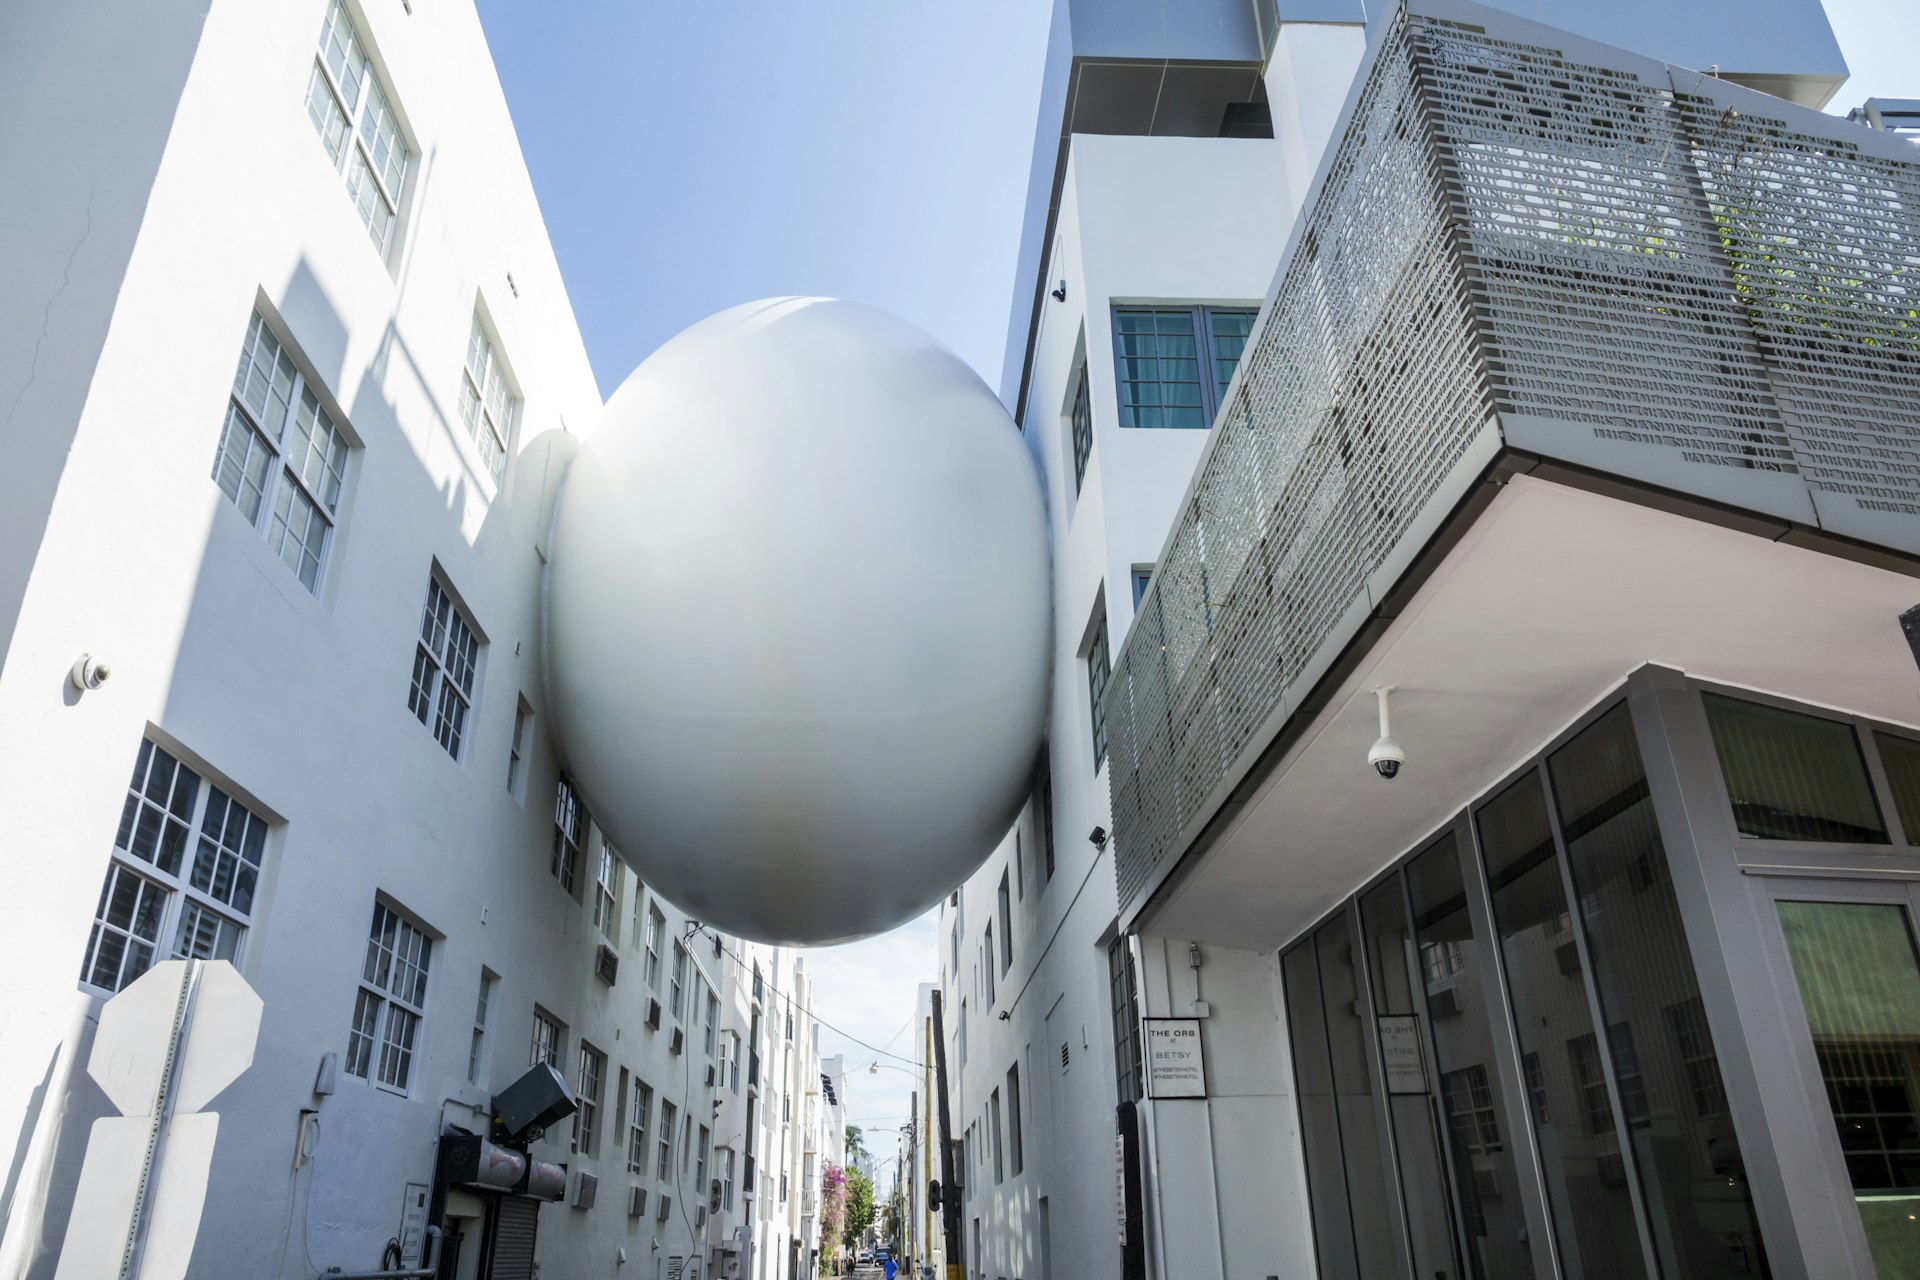 The Orb artwork, a large white sphere, sits squashed between the Betsy Hotel and the building next door